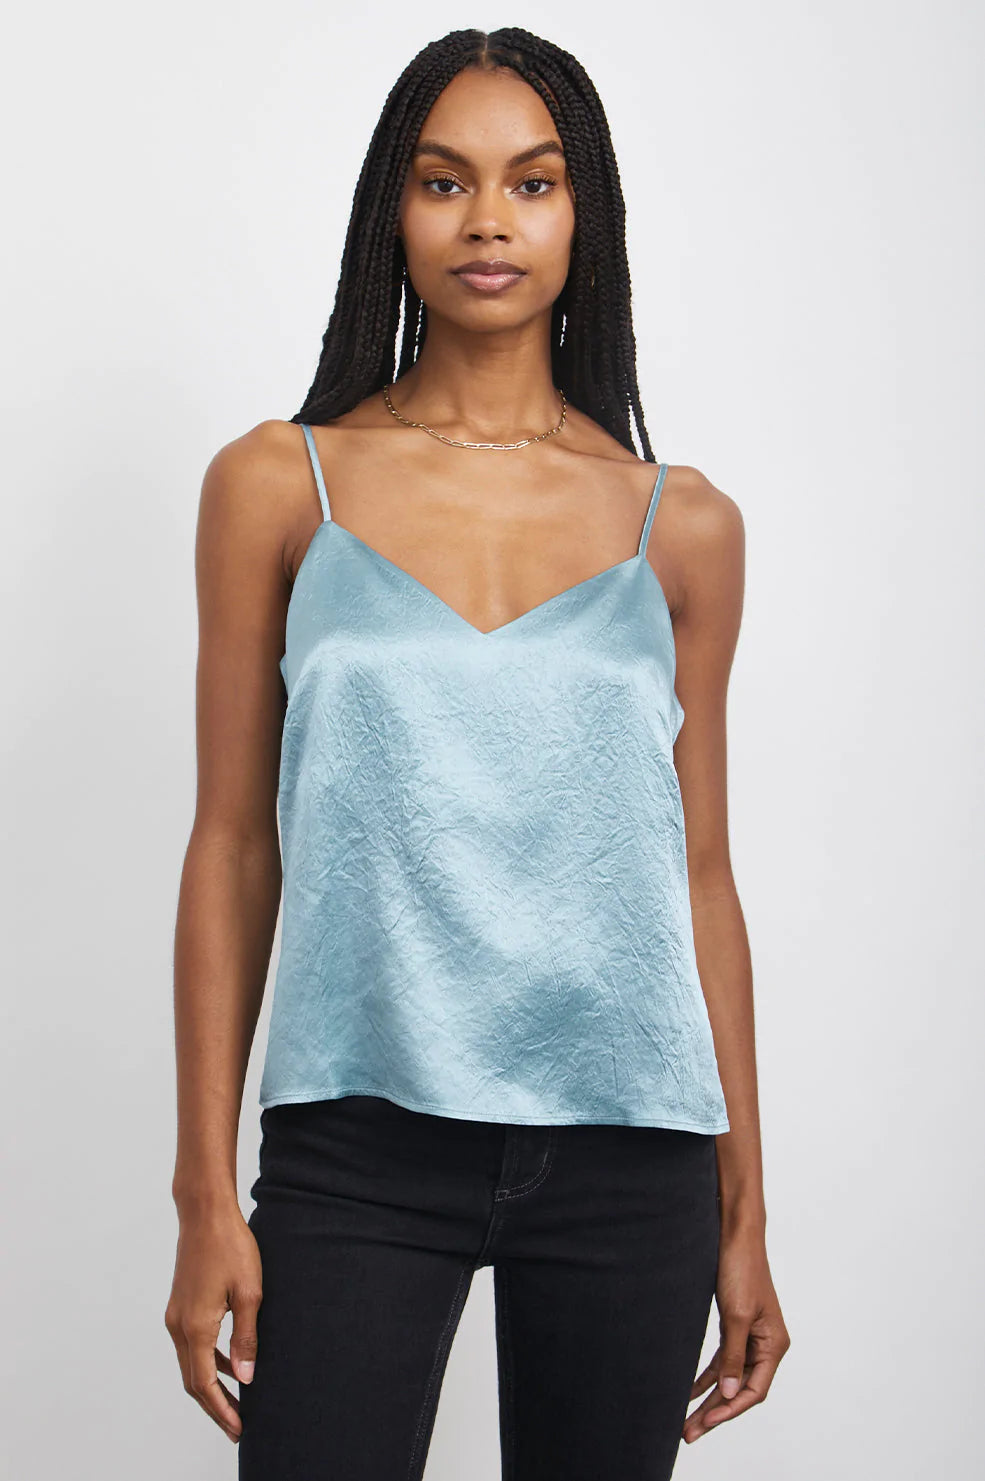 Duck egg blue silky camisole with adjustable straps